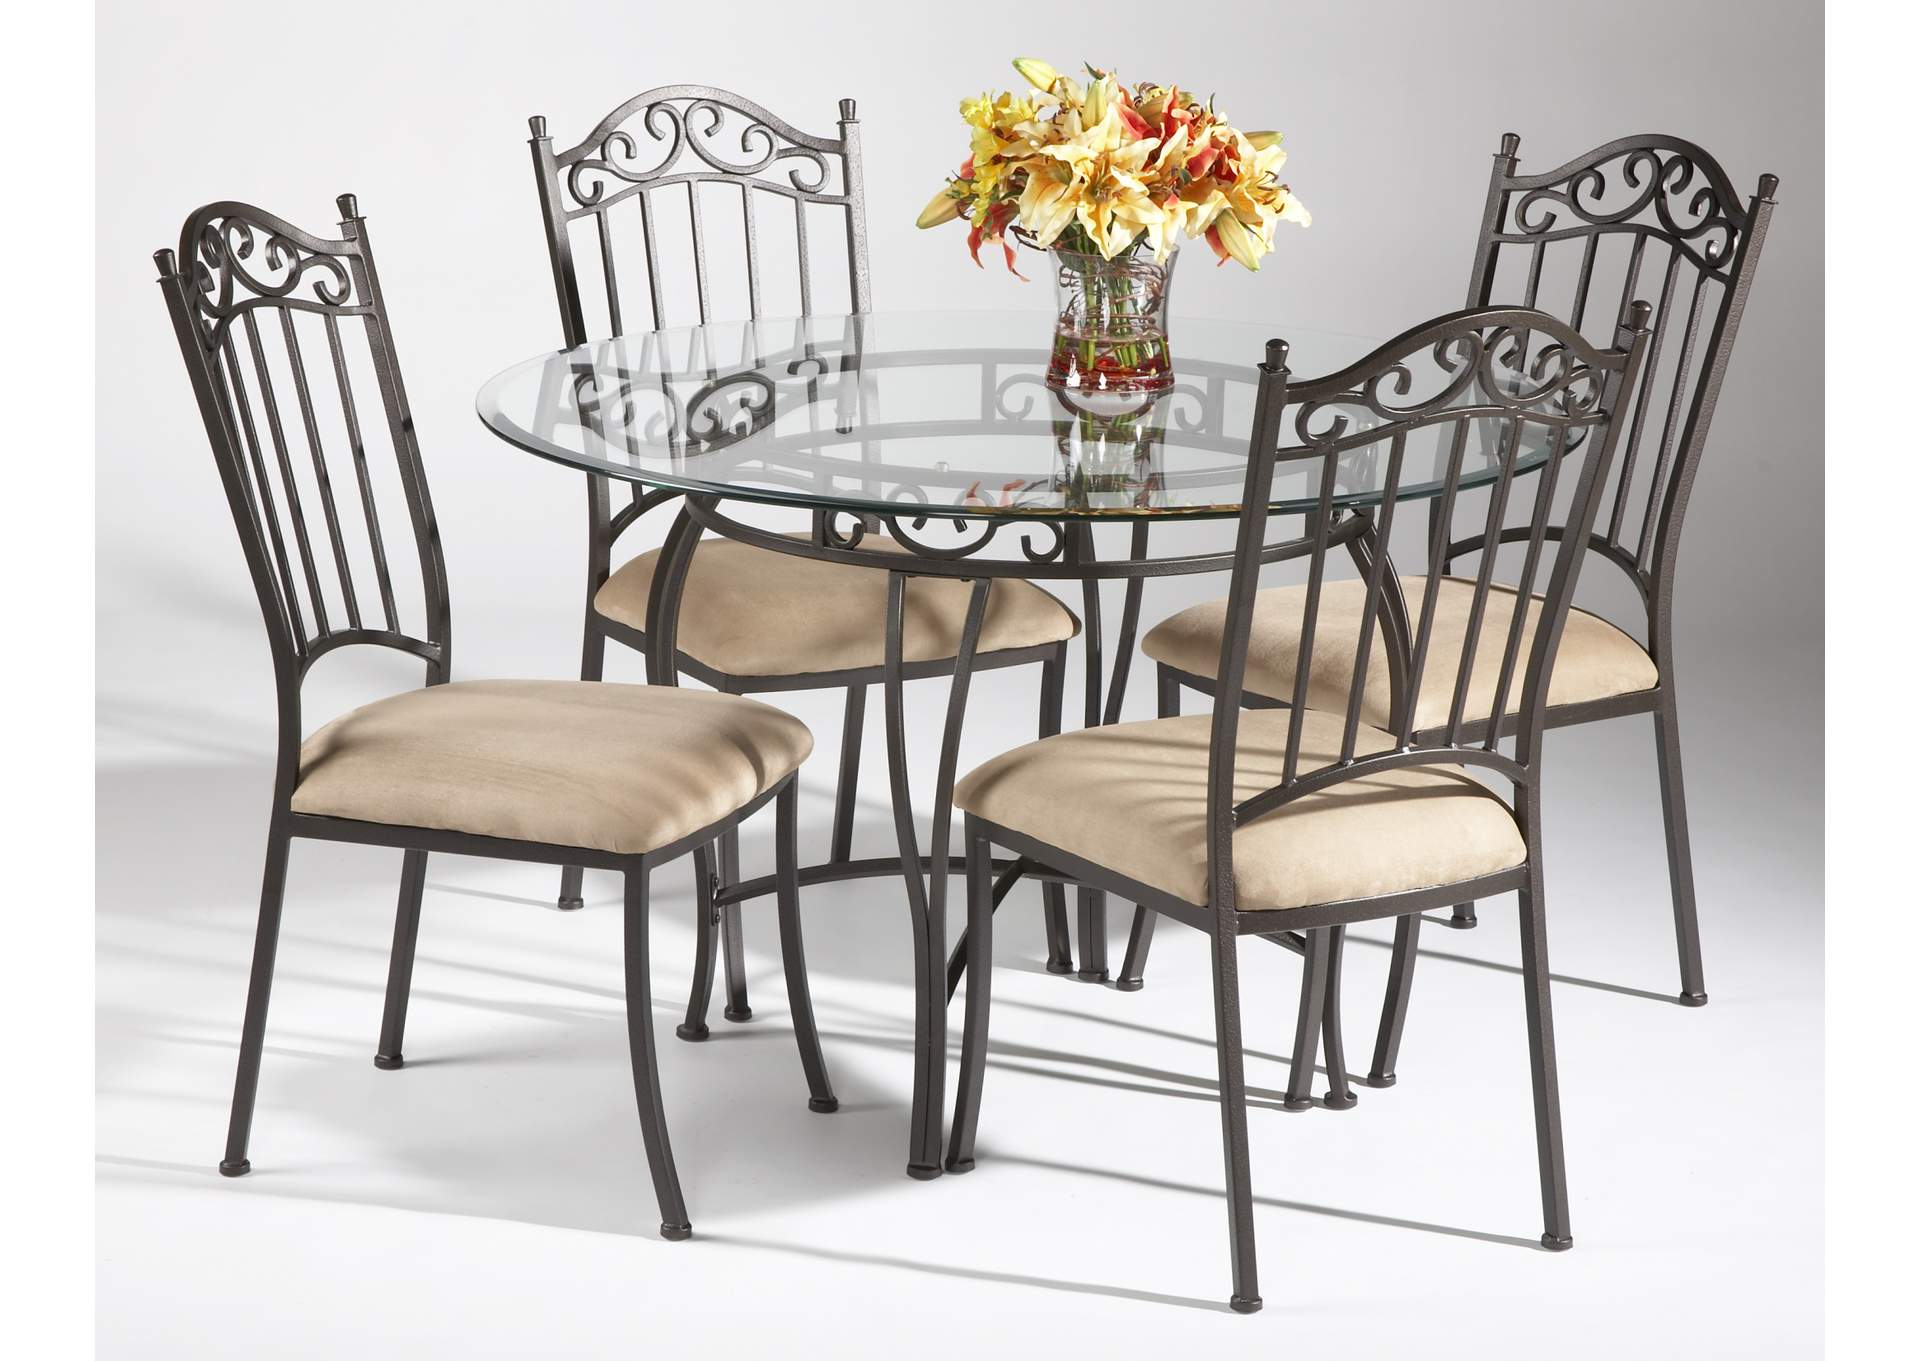 Transitional Style Dining Set With Wrought Iron Glass Table & Chairs,Chintaly Imports